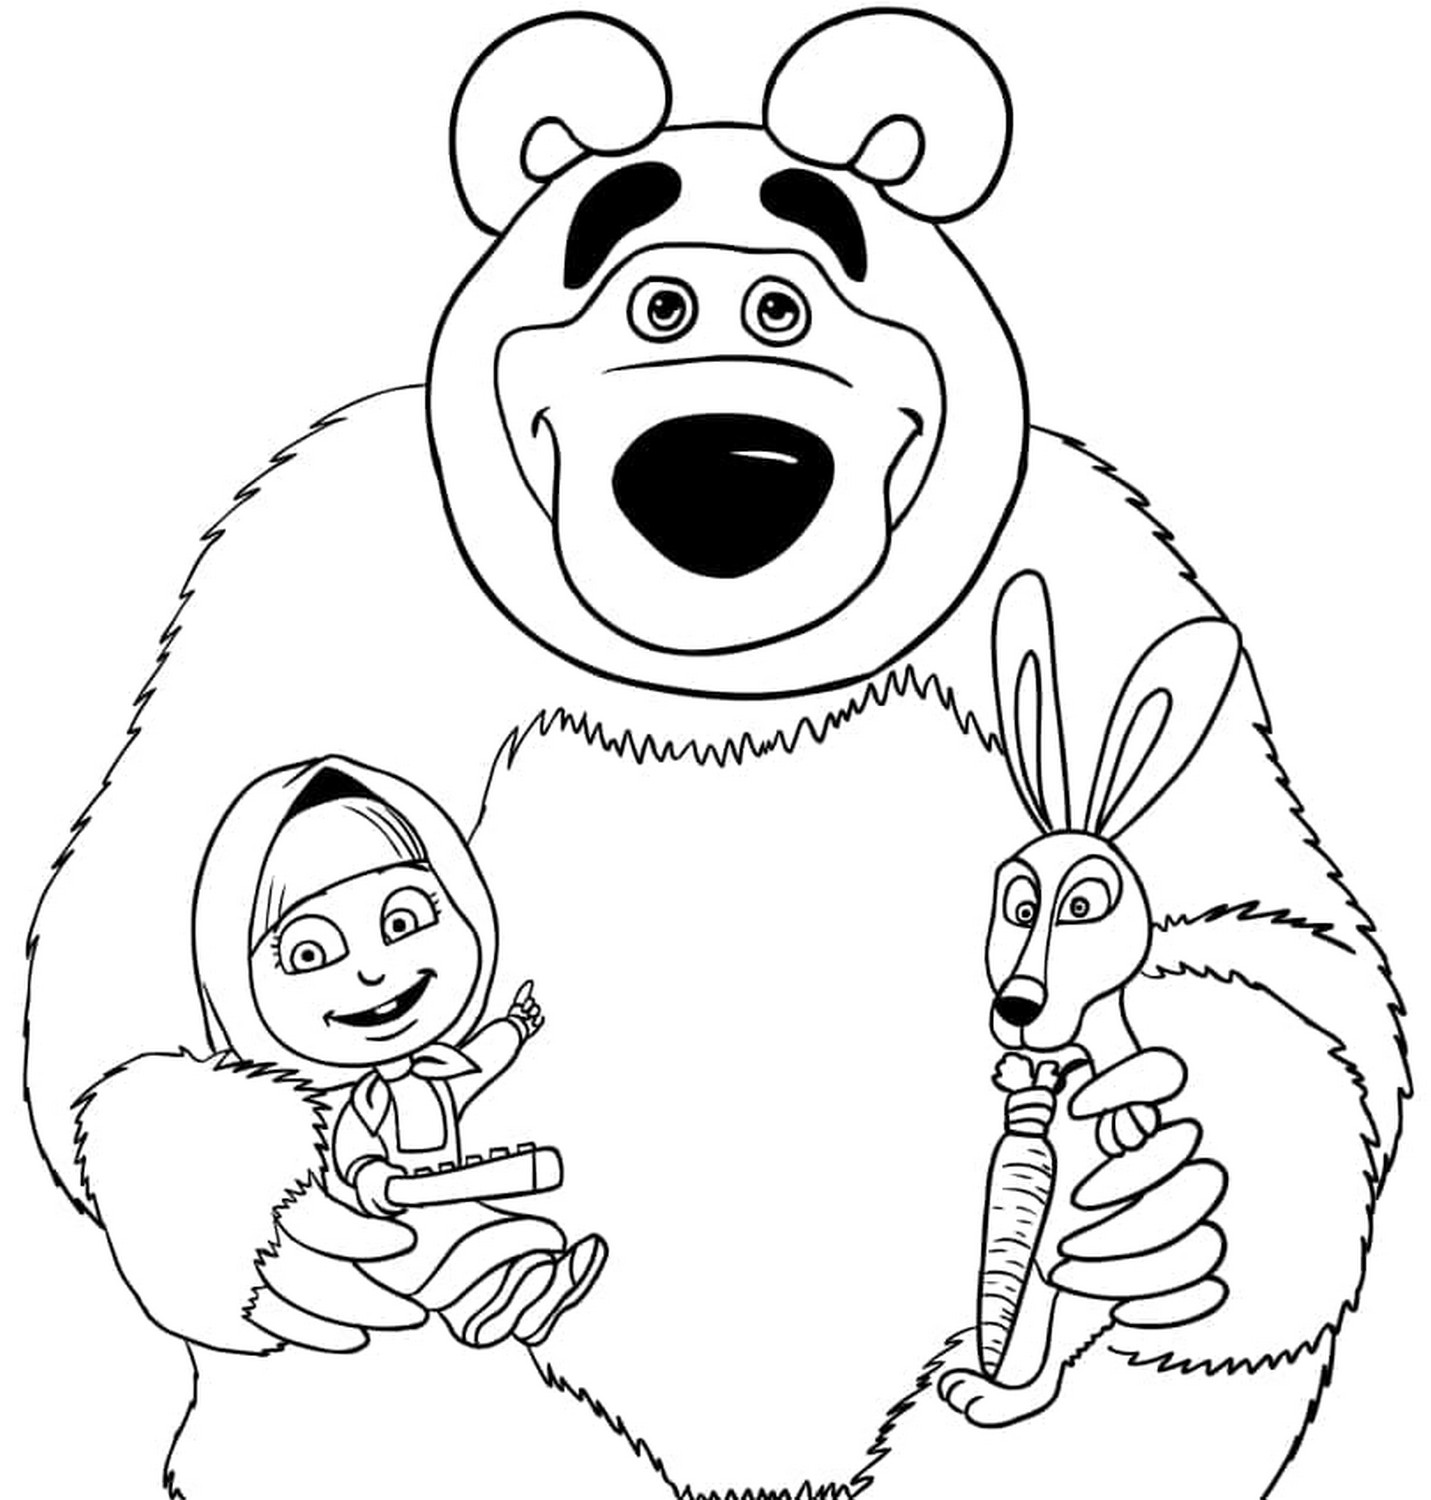 Masha and the Bear 100 drawing from Masha and the Bear to print and color